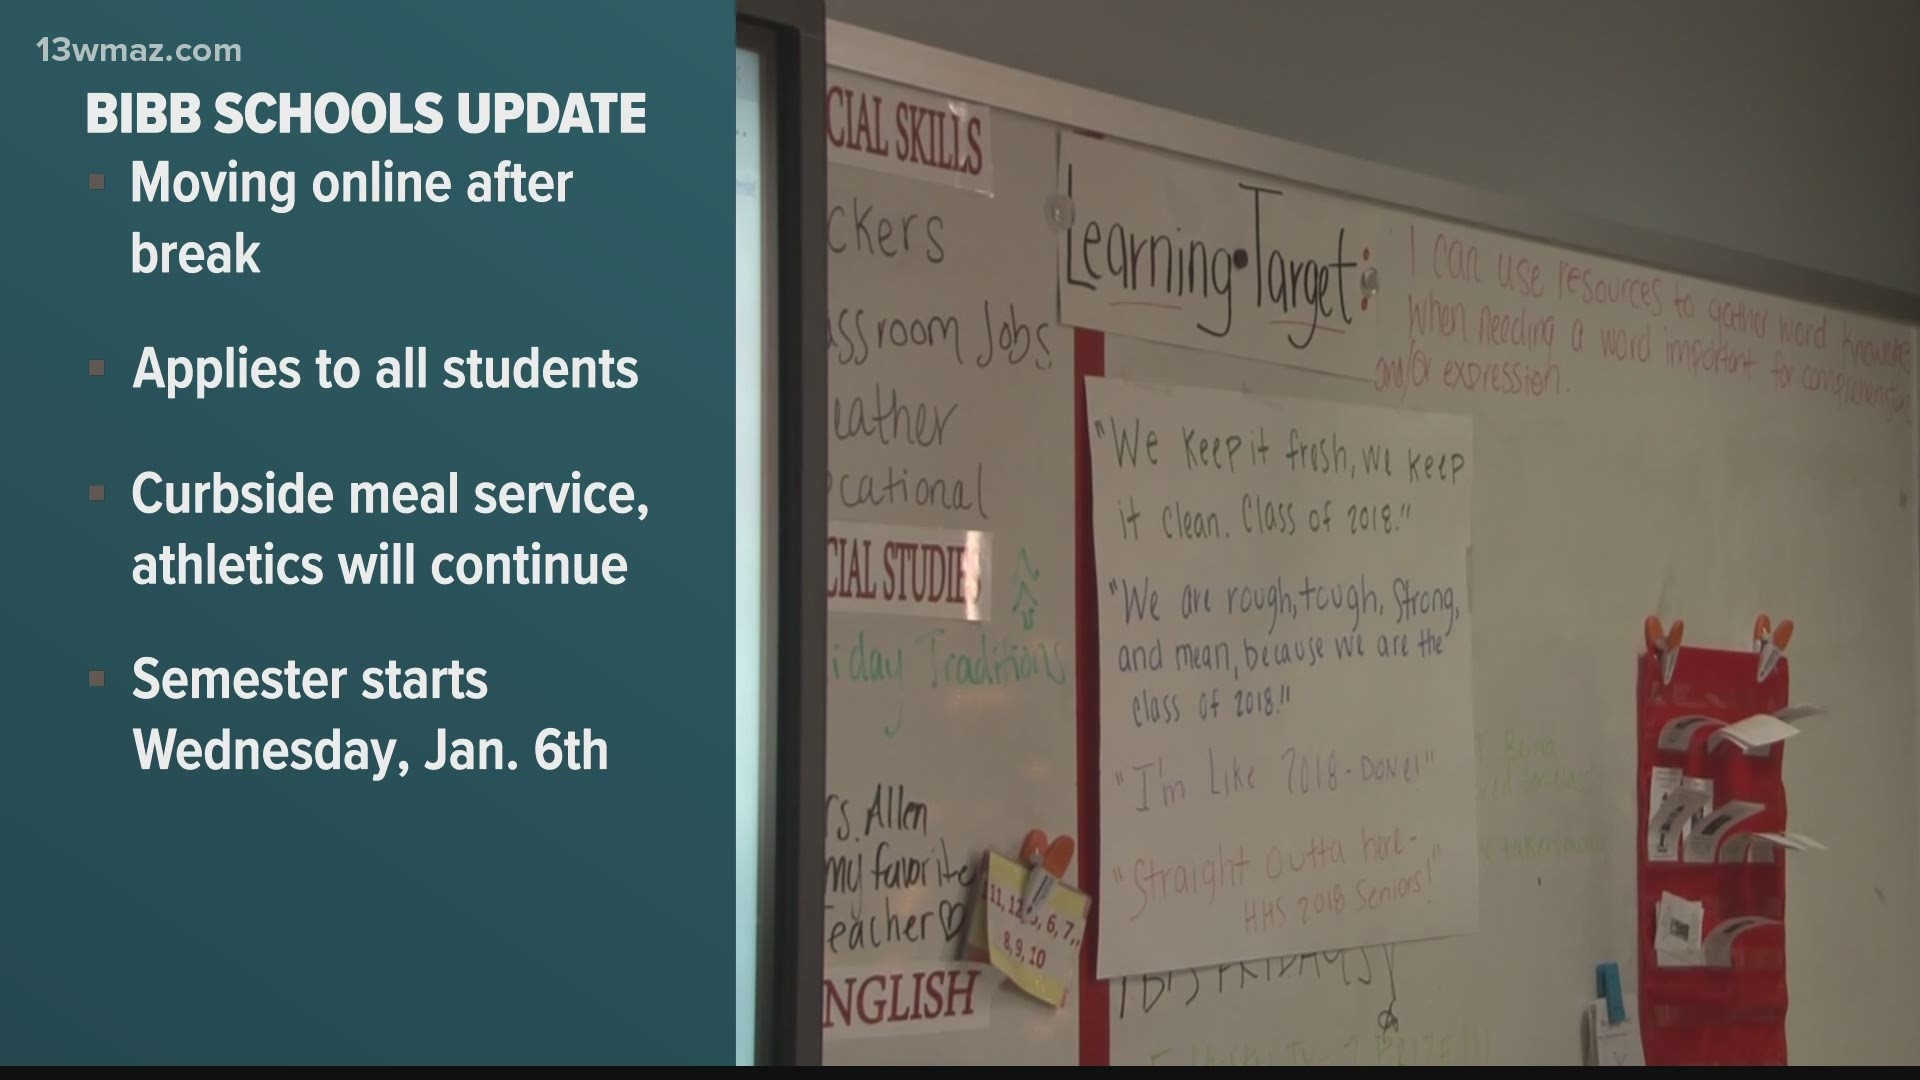 All students, including those enrolled in face-to-face instruction, will now be remote.